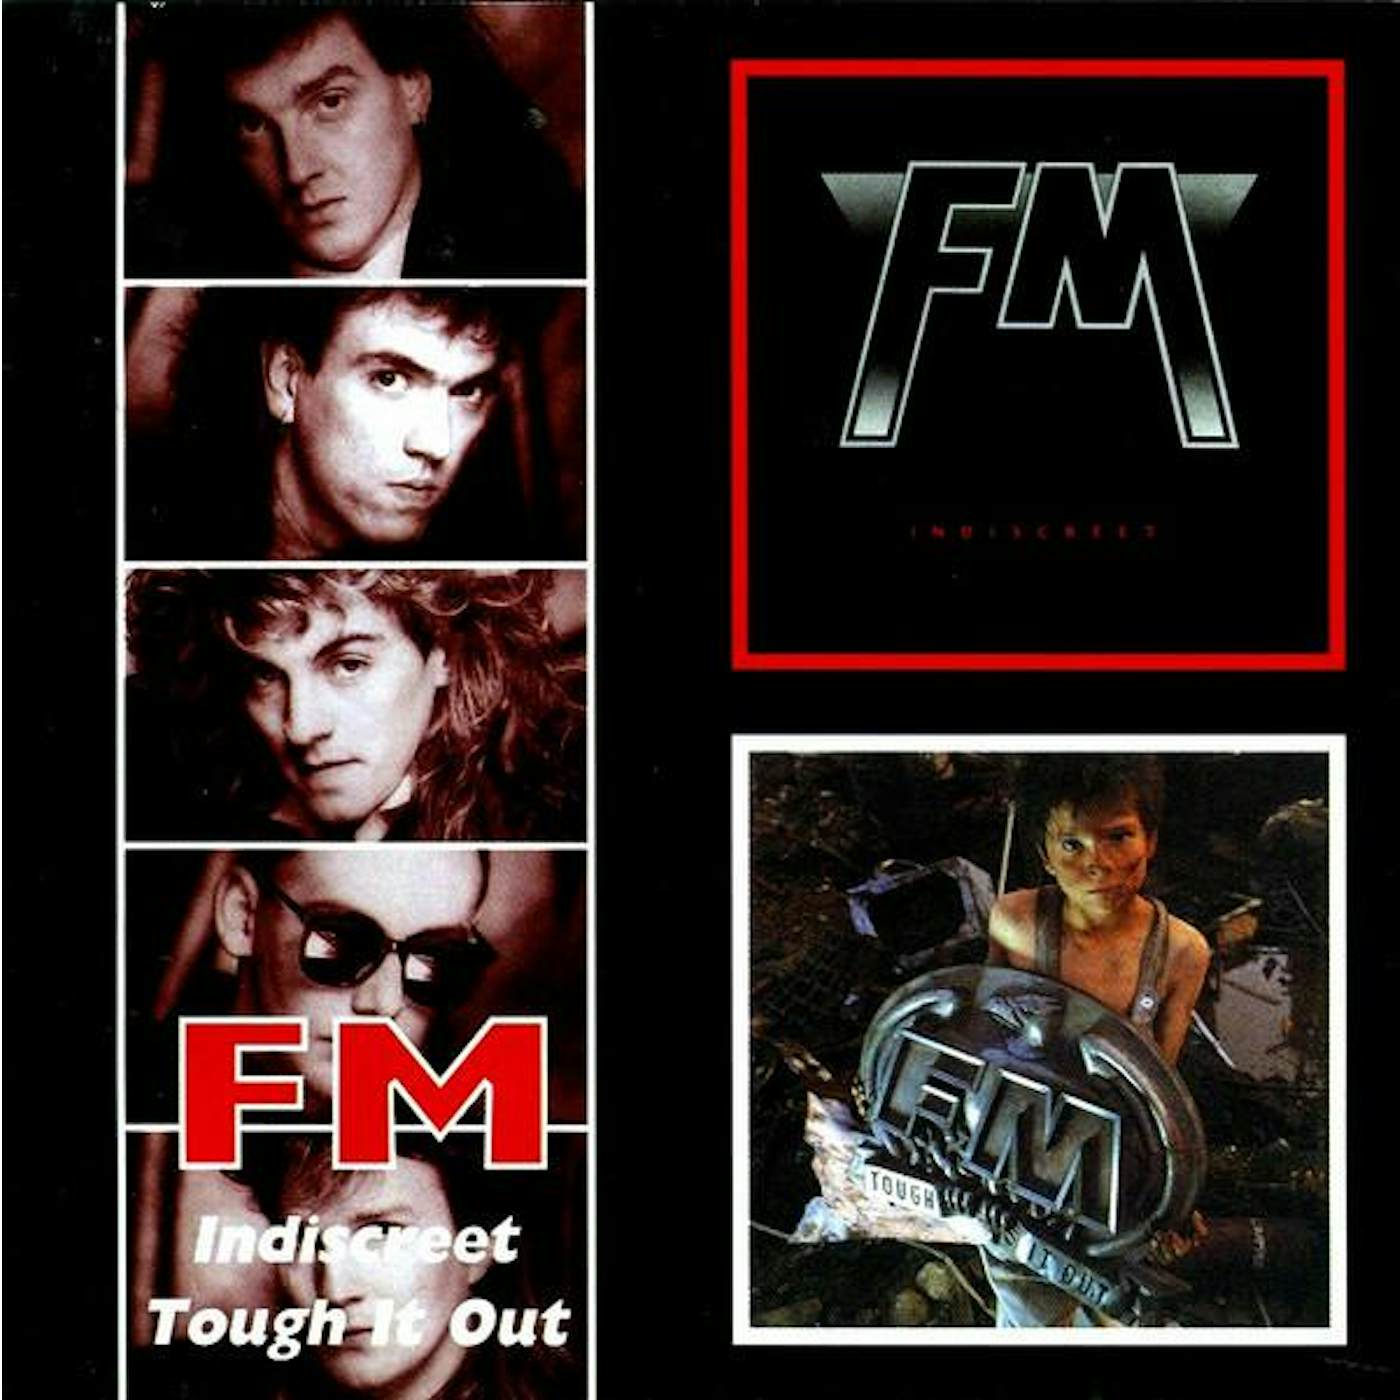 FM INDISCREET / TOUGH IT OUT (REMASTERED) CD